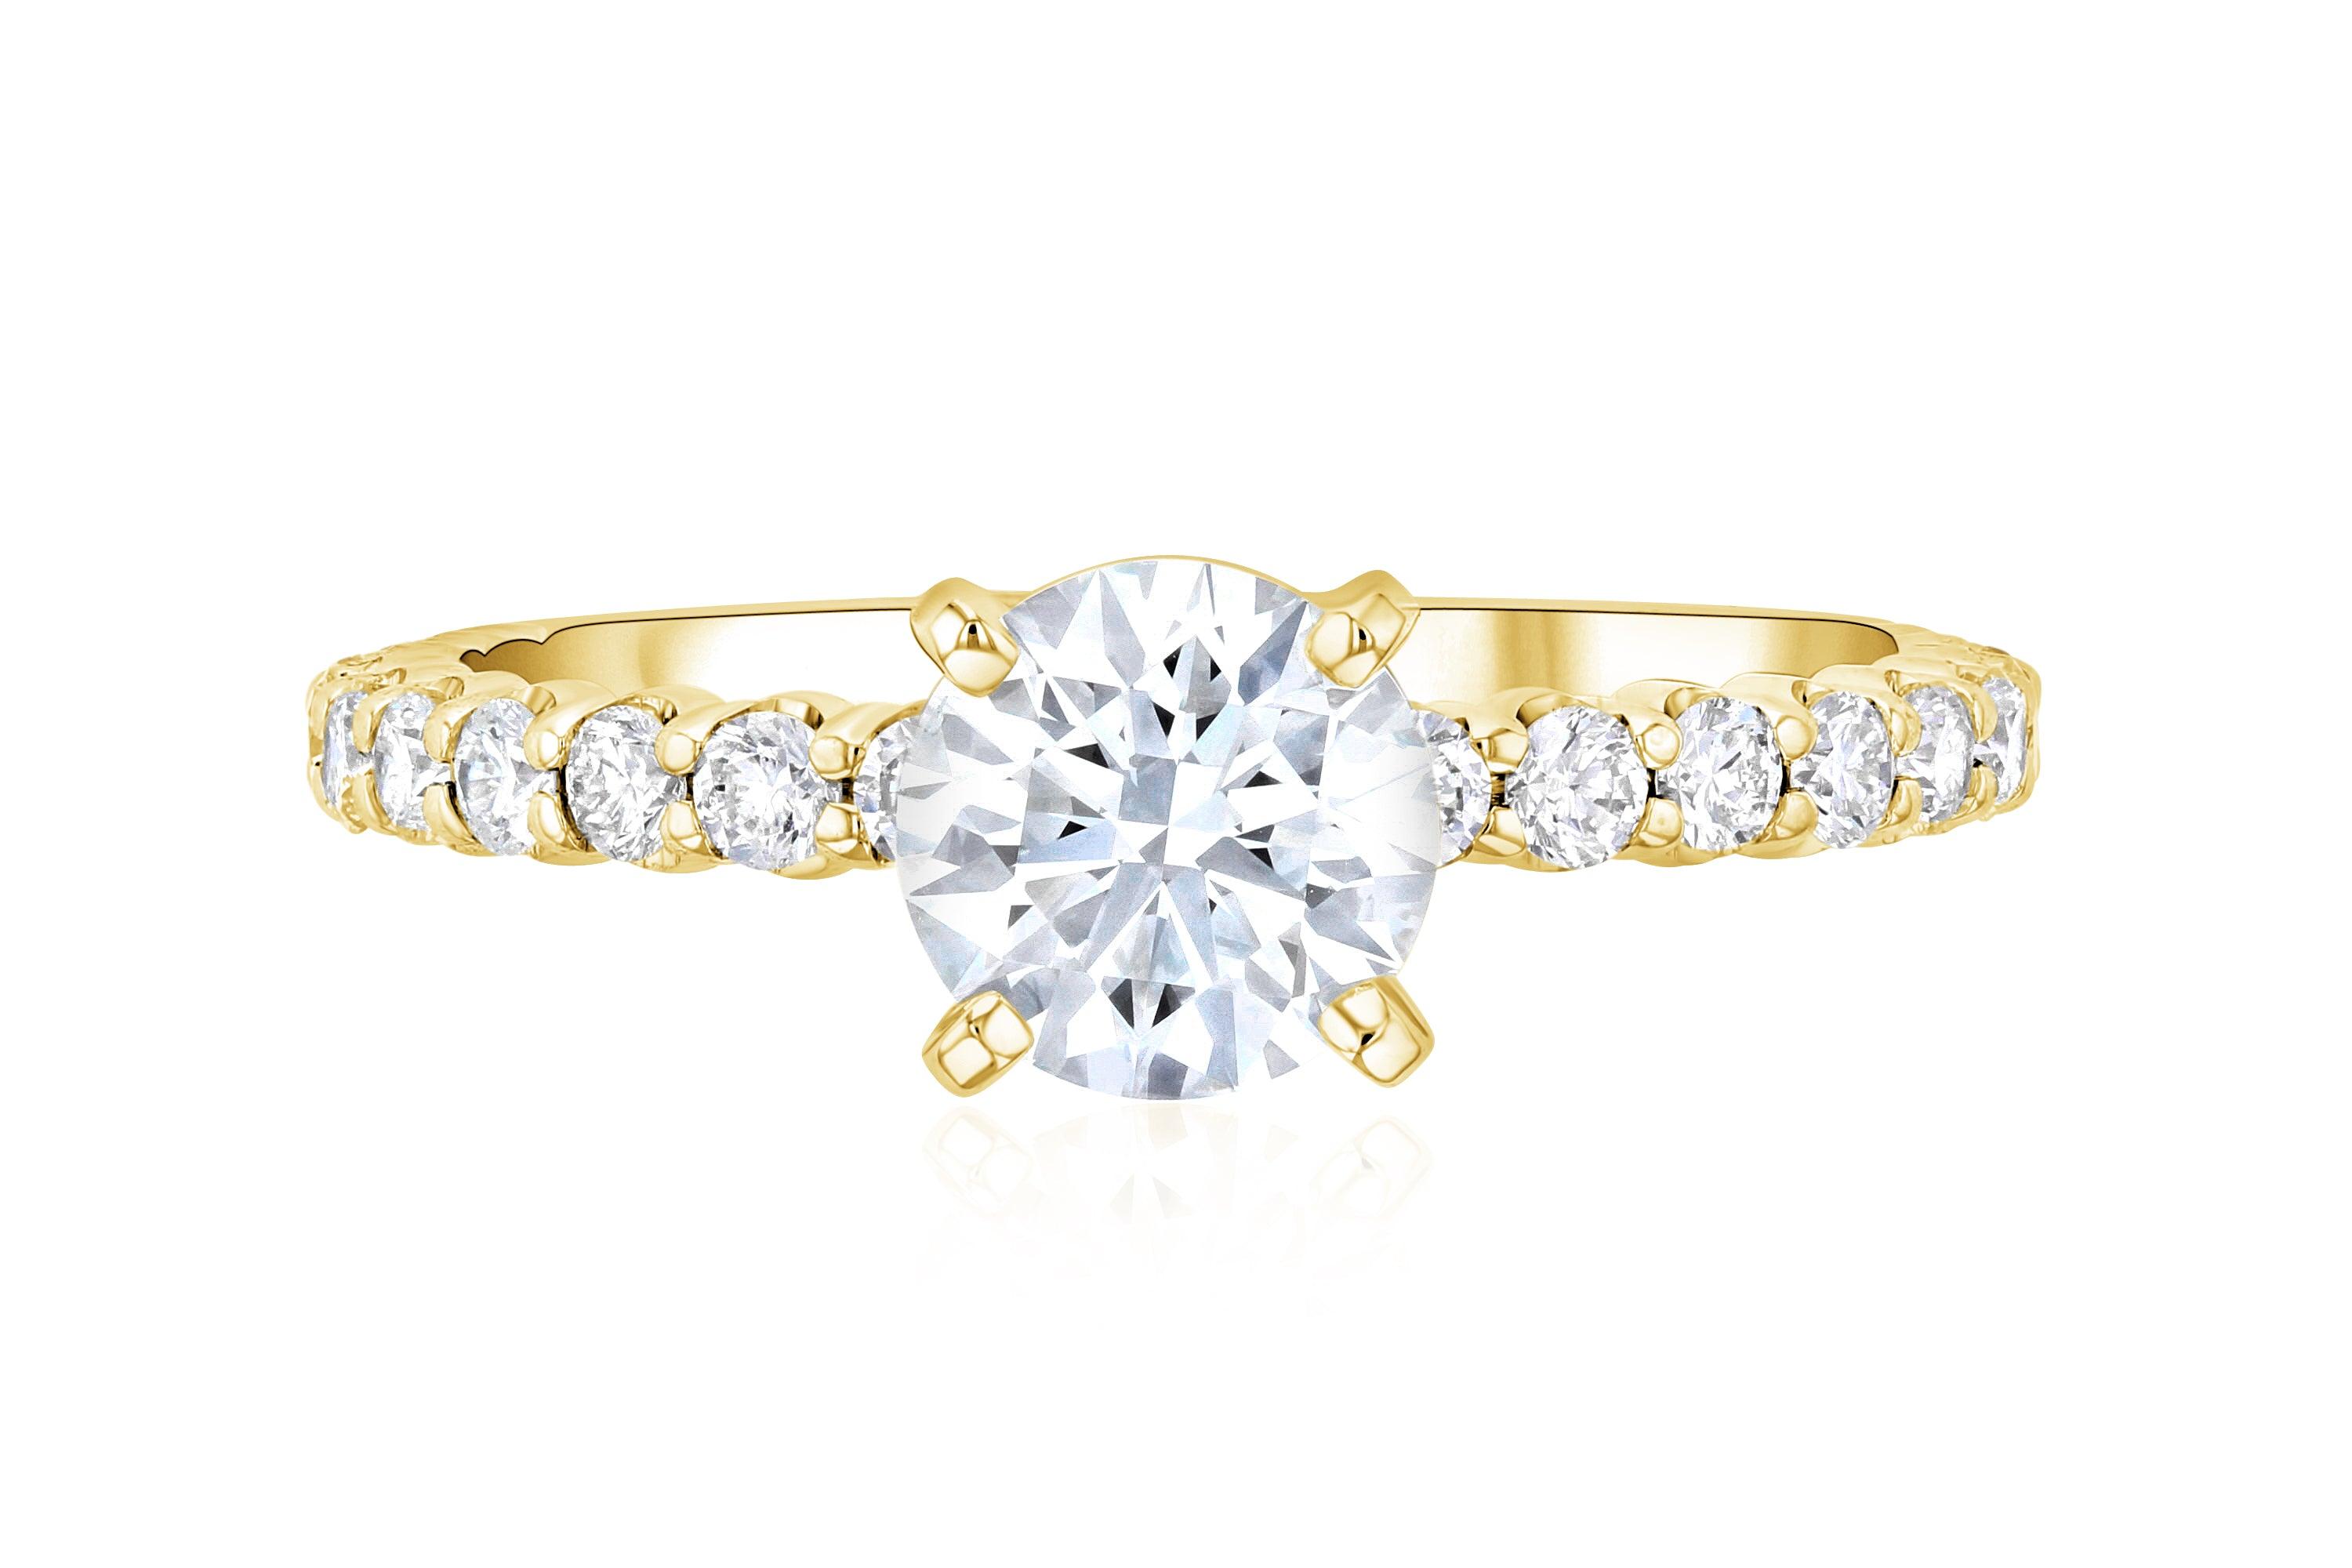 Micro Pavé Round Diamond Solitaire Engagement Ring - The Brothers Jewelry Co.